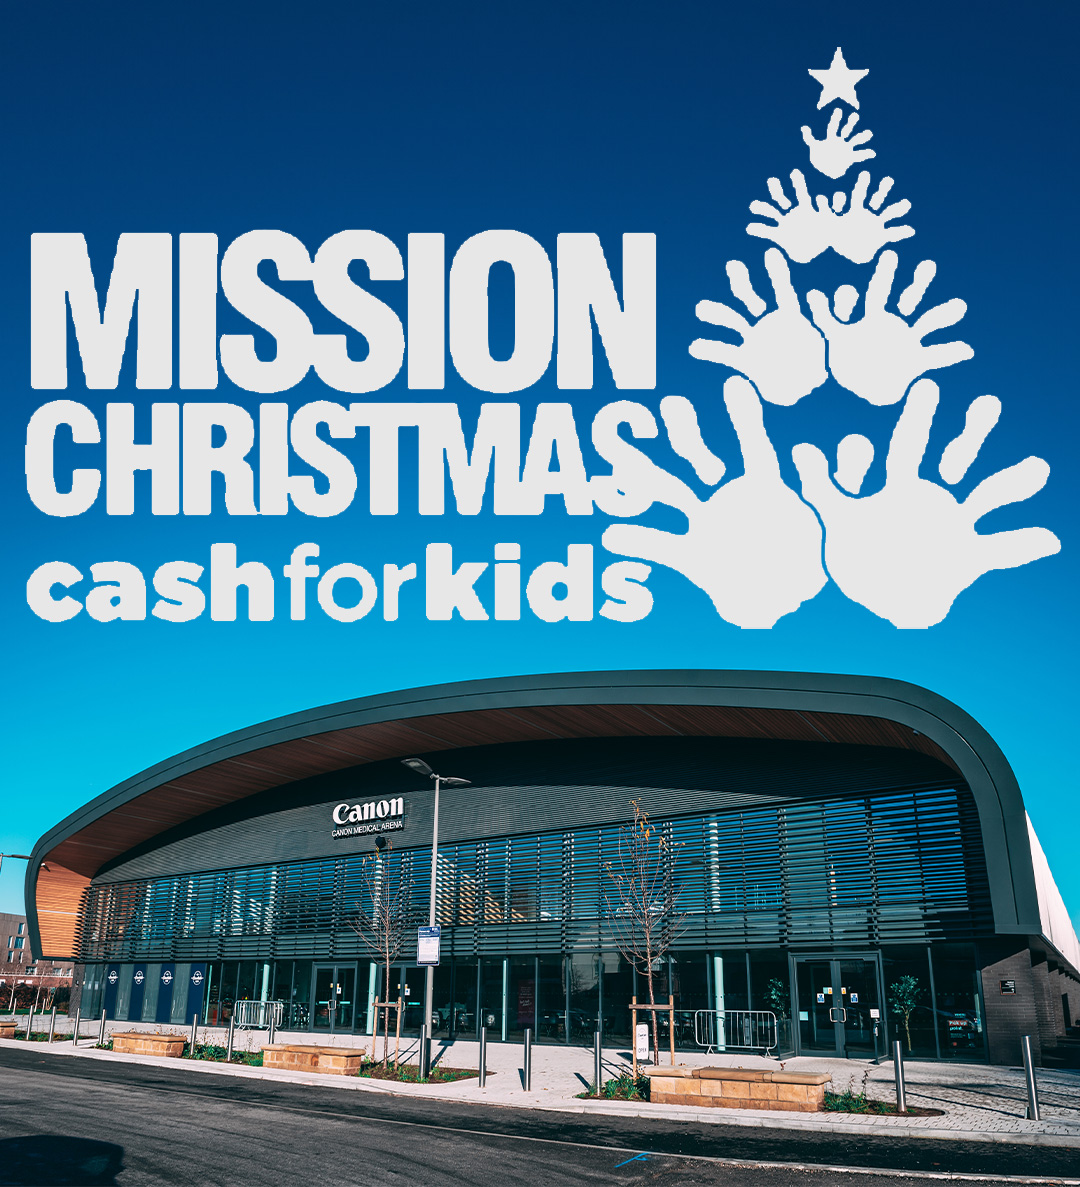 We are supporting Cash for Kids Mission Christmas campaign as an official drop-off point! 🎁 We’ve added a collection box in reception so if you would like to donate any (new and unwrapped) gifts please feel free. More info: cashforkids.org.uk/mission